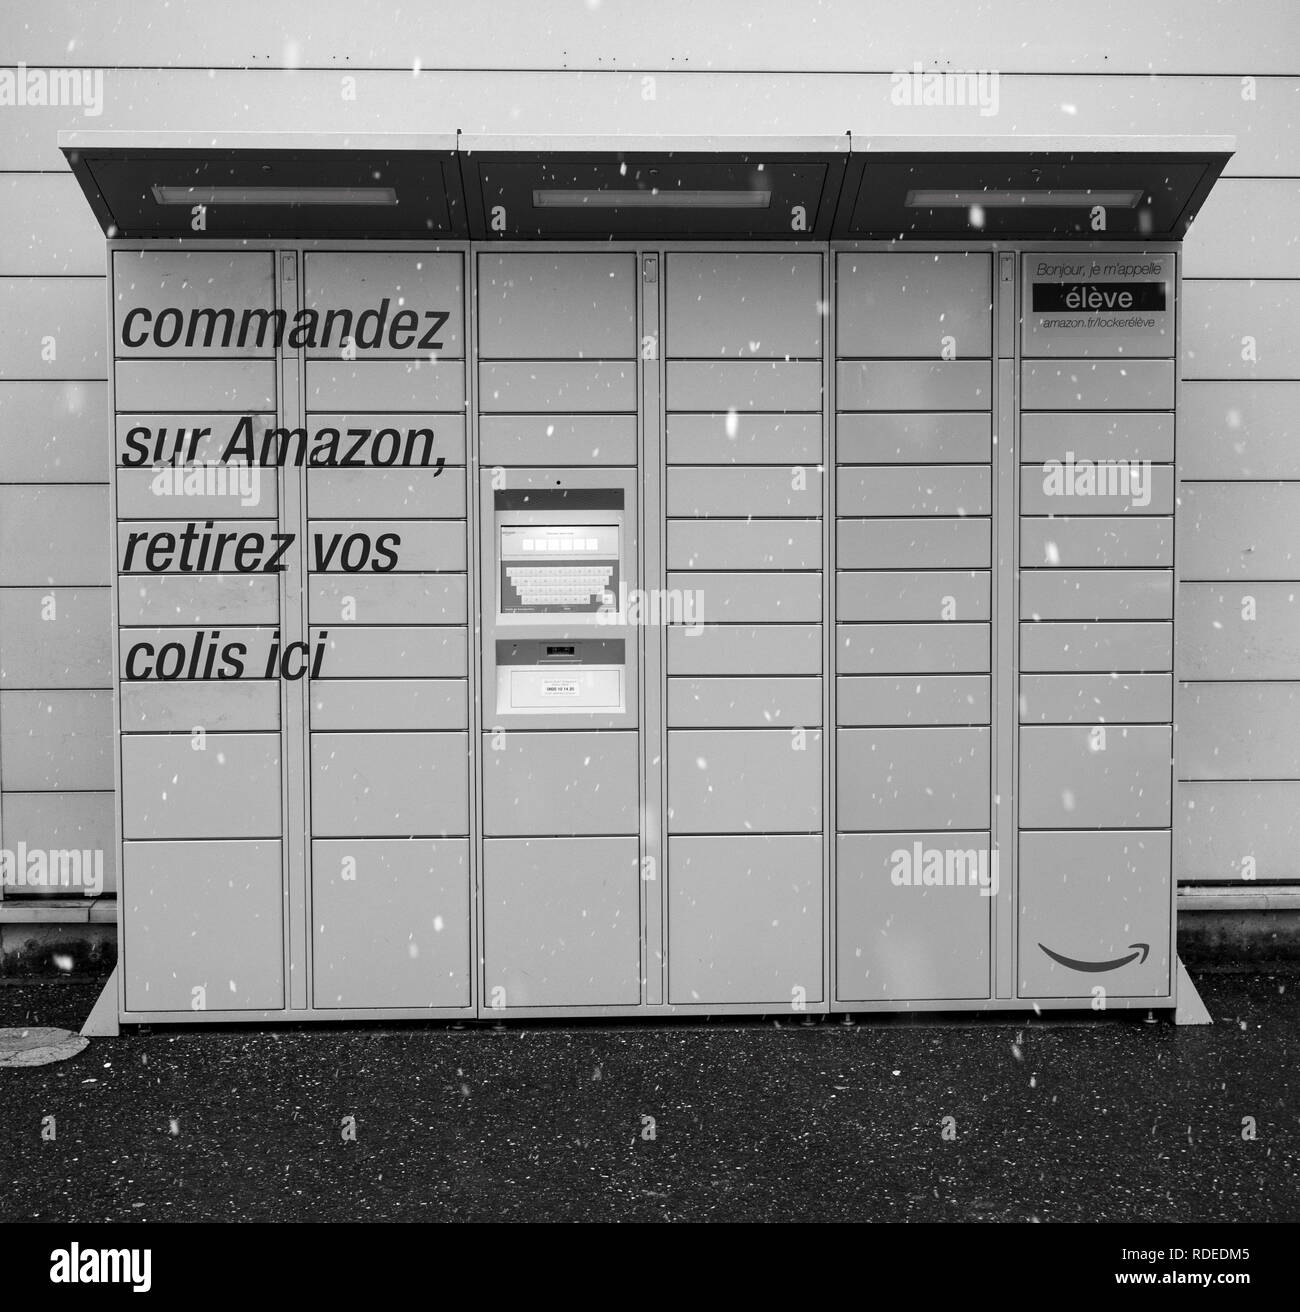 LYON, FRANCE - FEB 4, 2017: Snowing in front of Modern Amazon Locker orange delivery parcel package locker - self-service parcel delivery offered by online retailer Amazon.com - black and white Stock Photo